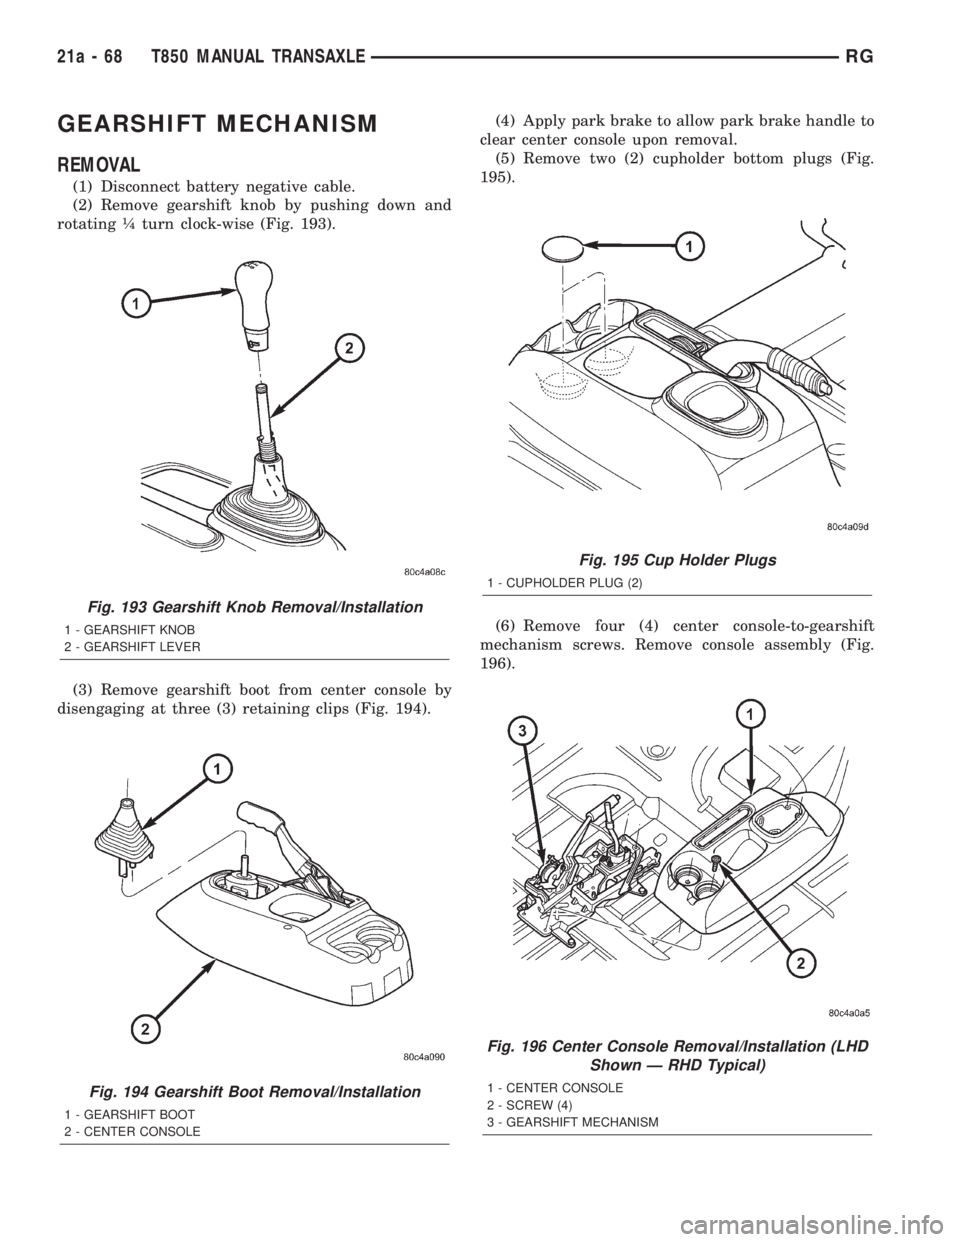 CHRYSLER VOYAGER 2001  Service Manual GEARSHIFT MECHANISM
REMOVAL
(1) Disconnect battery negative cable.
(2) Remove gearshift knob by pushing down and
rotating ò turn clock-wise (Fig. 193).
(3) Remove gearshift boot from center console b